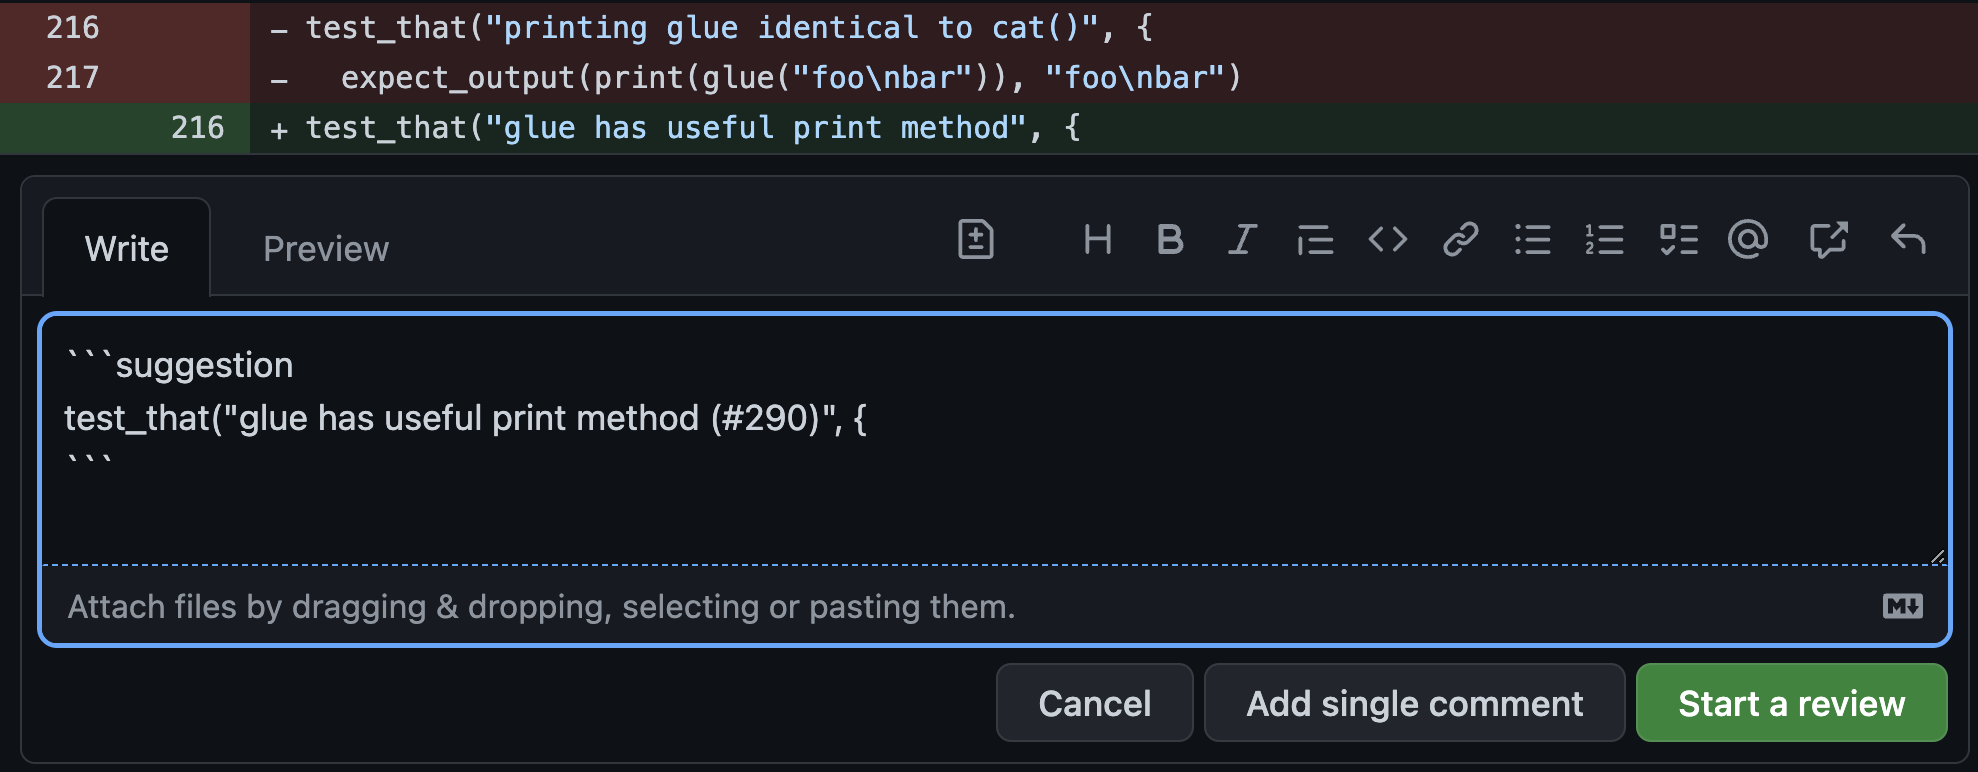 Screenshot of GitHub UI for commenting on a changed file for a pull request. The markup for making a suggestion is shown in the comment box: three backticks before the word suggestion begin the suggested code change, which is followed by three closing backticks.